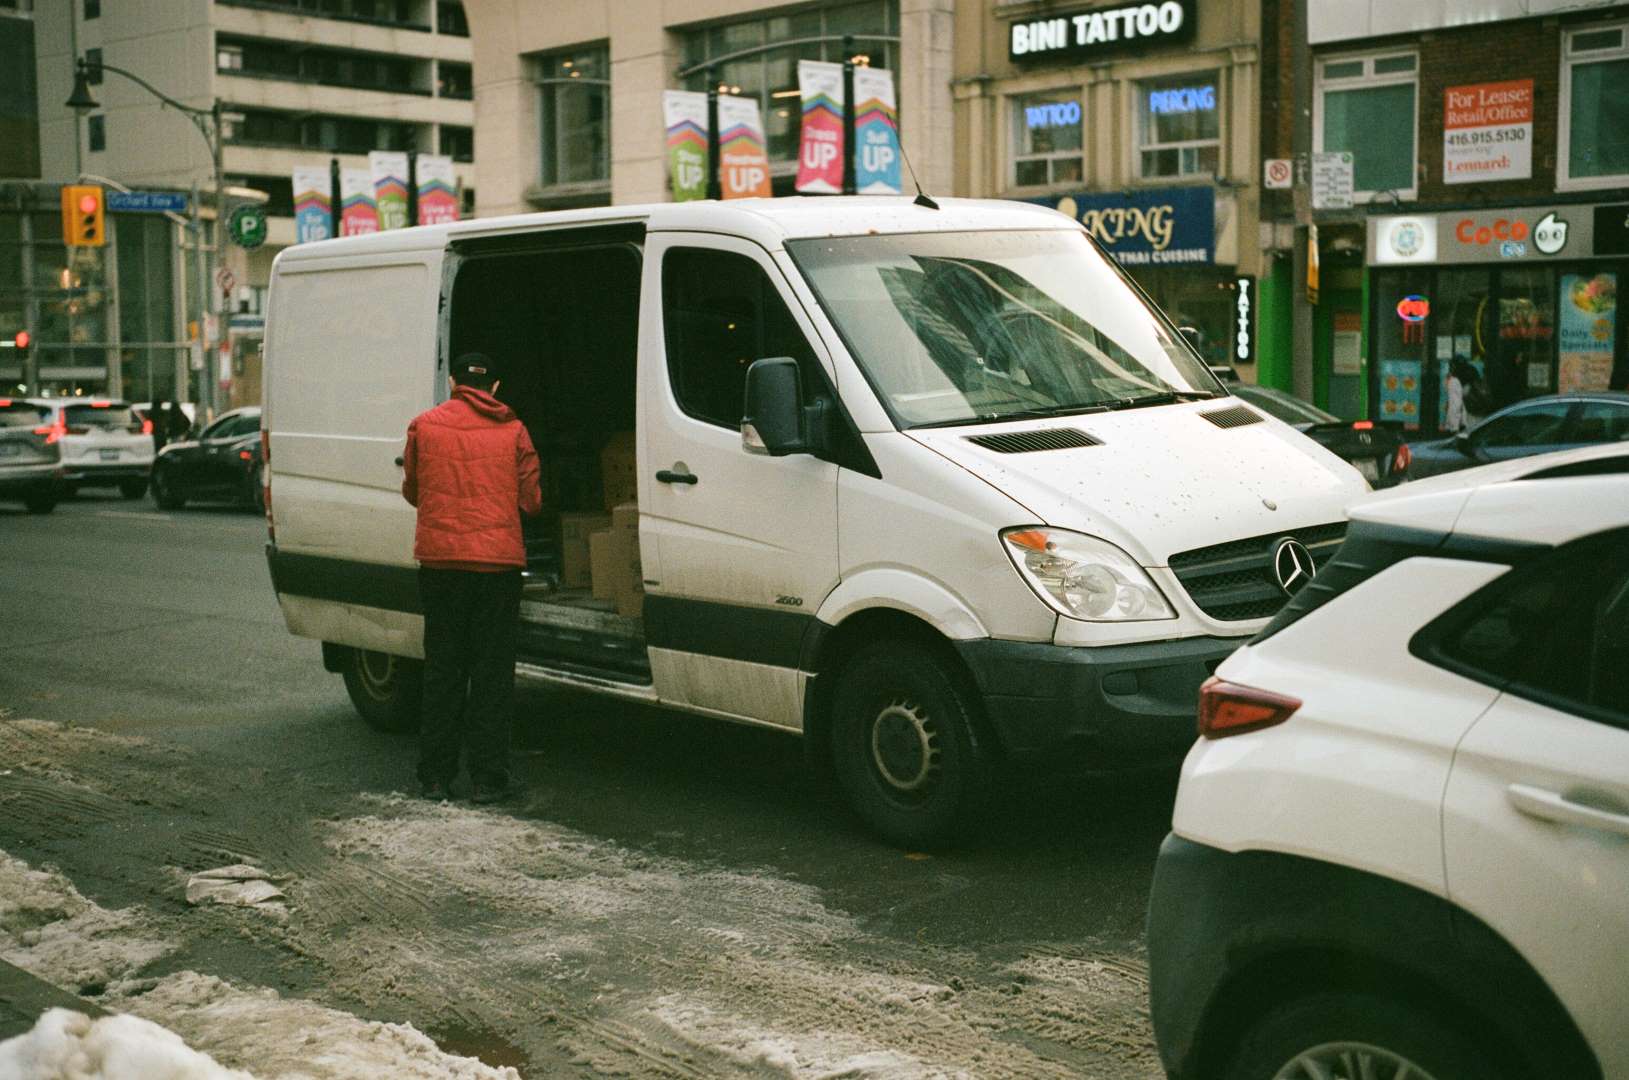 A colour photograph of a delivery man unloading goods in the street.